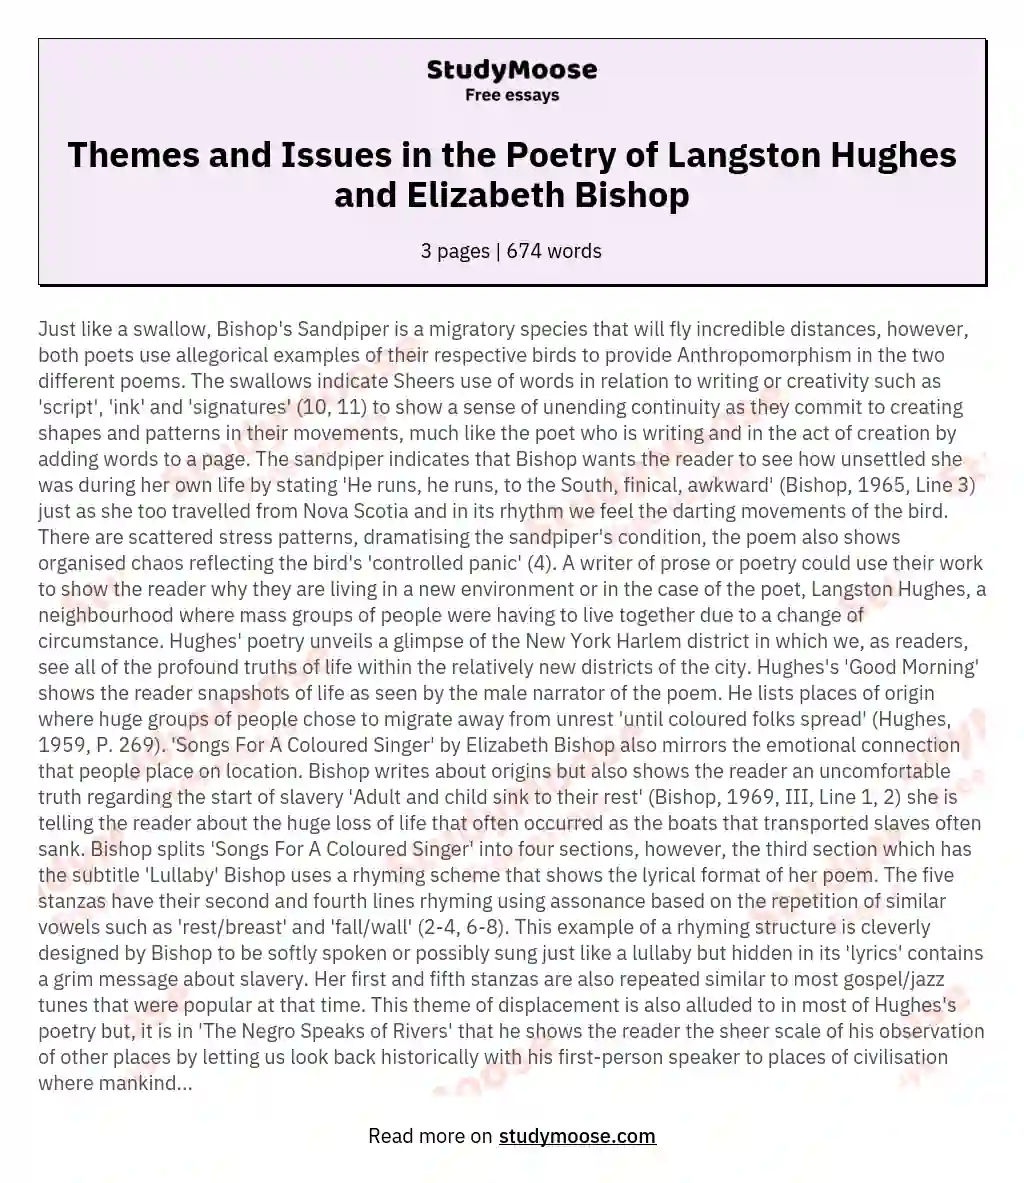 Themes and Issues in the Poetry of Langston Hughes and Elizabeth Bishop essay